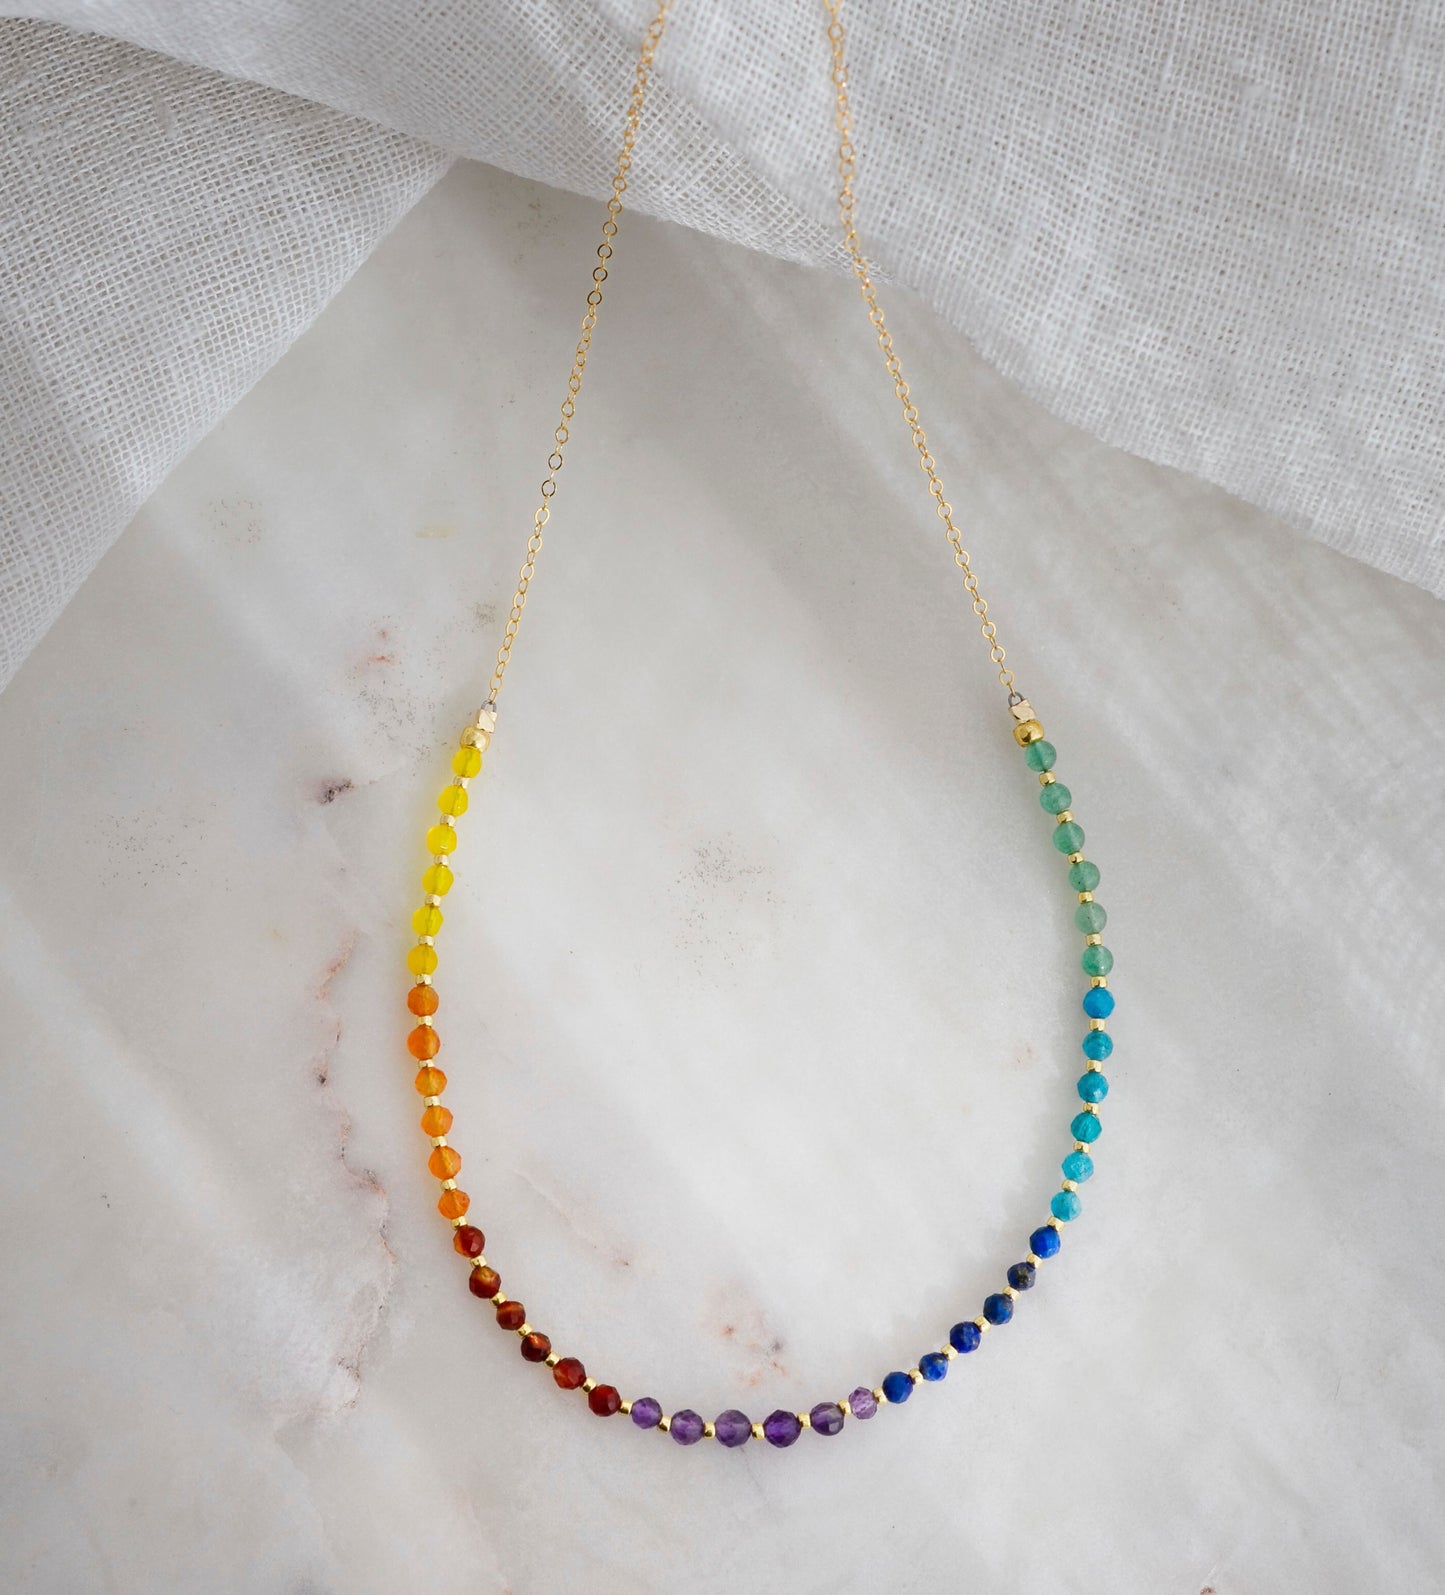 The single rainbow style beaded necklace is shown in gold.